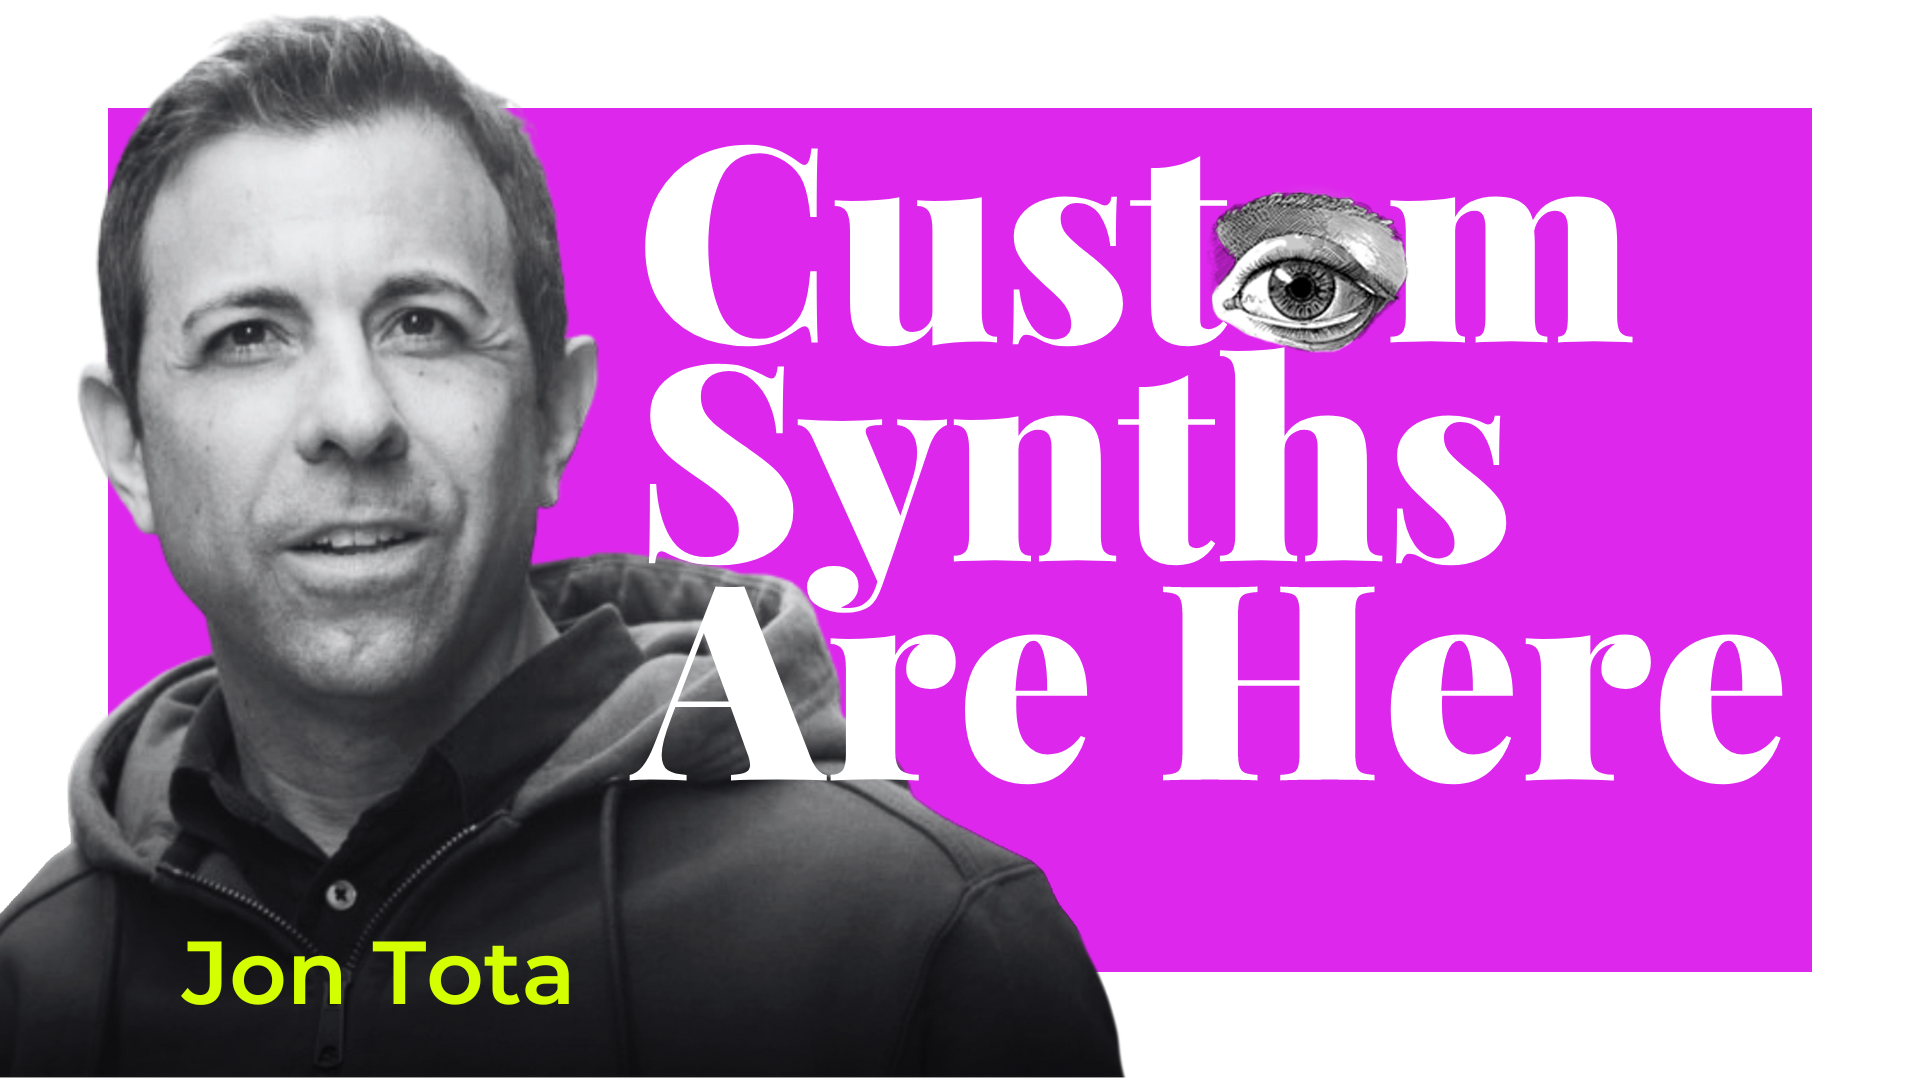 Creativity Squared Title Card featuring Jon Tota: Custom Synths Are Here